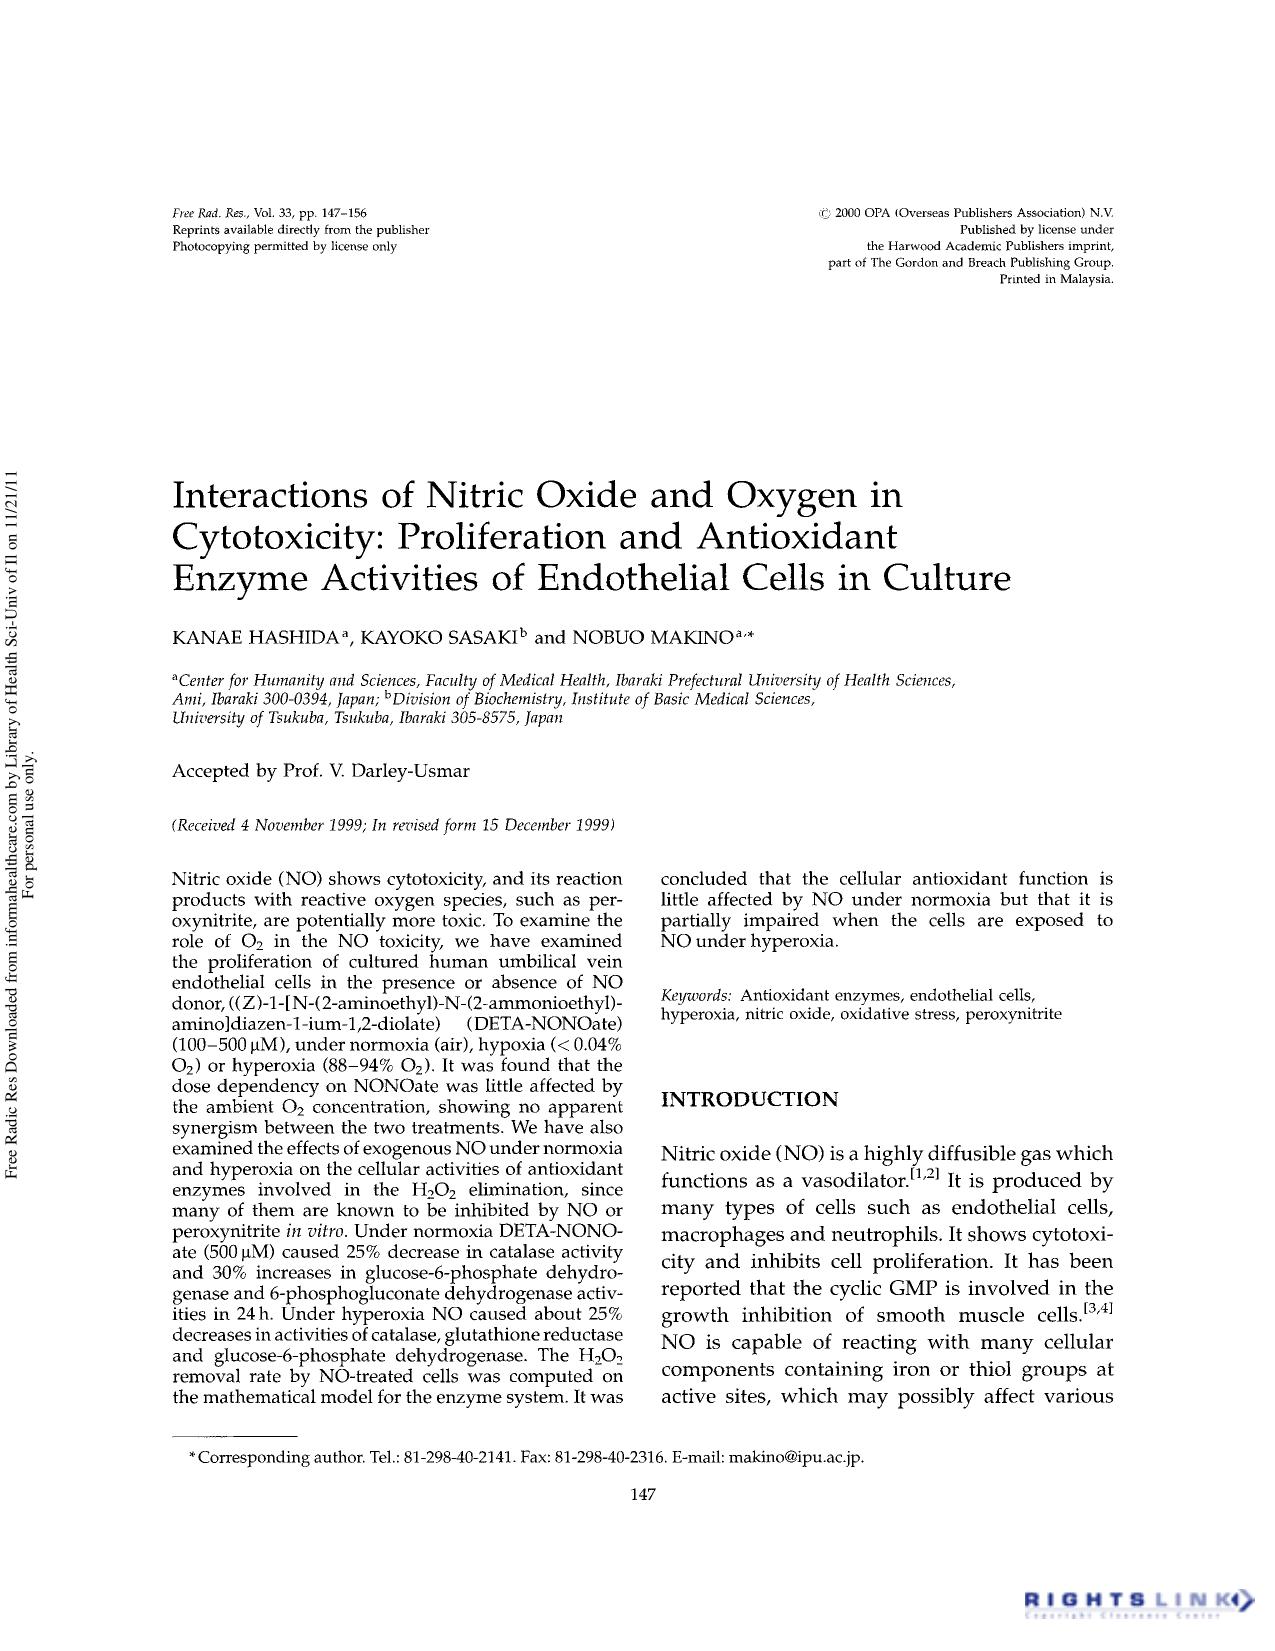 Interactions of nitric oxide and oxygen in cytotoxicity: Proliferation and antioxidant enzyme activities of endothelial cells in culture by Kanae Hashida Kayoko Sasaki & Nobuo Makino